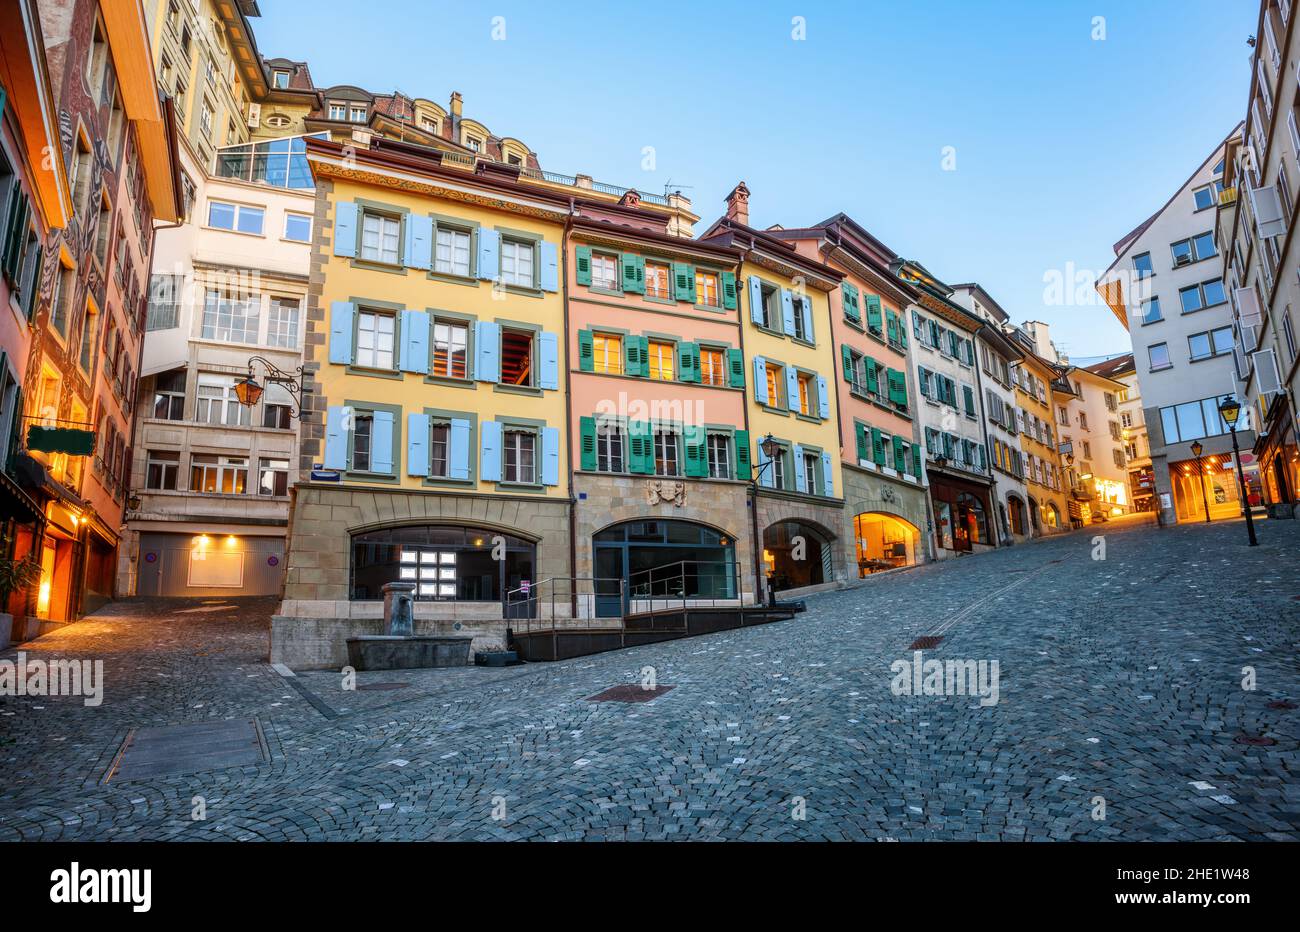 Colorful historical houses in Lausanne city's Old town center, Switzerland Stock Photo